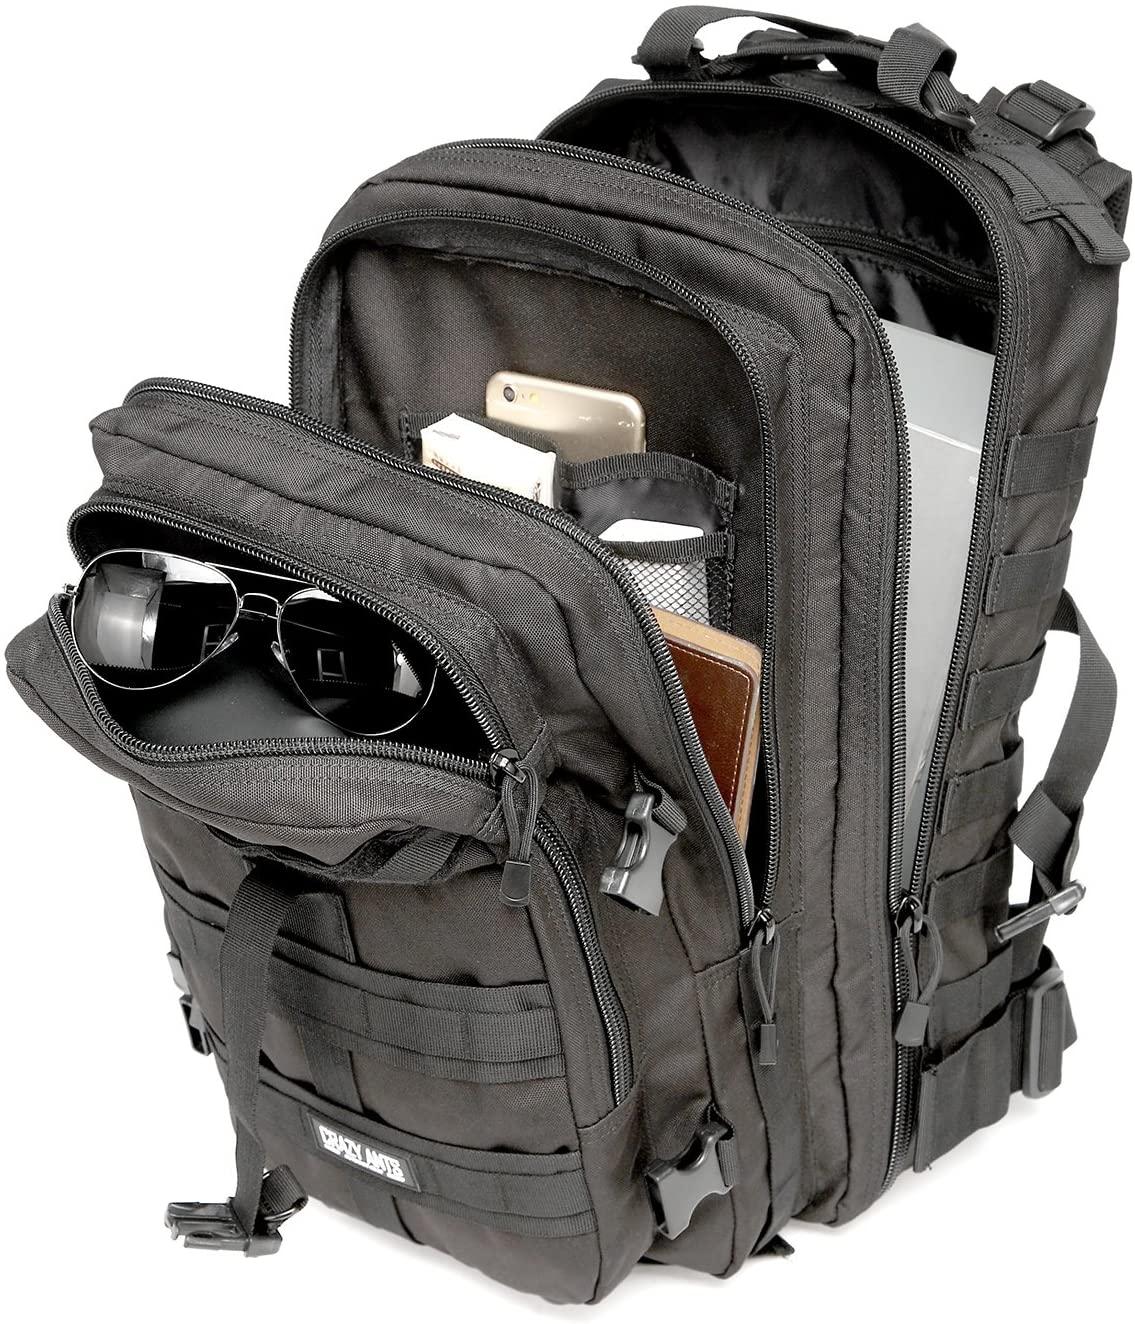 Men's Bug-out Bags Tactical Backpack - FR Fashion Co.